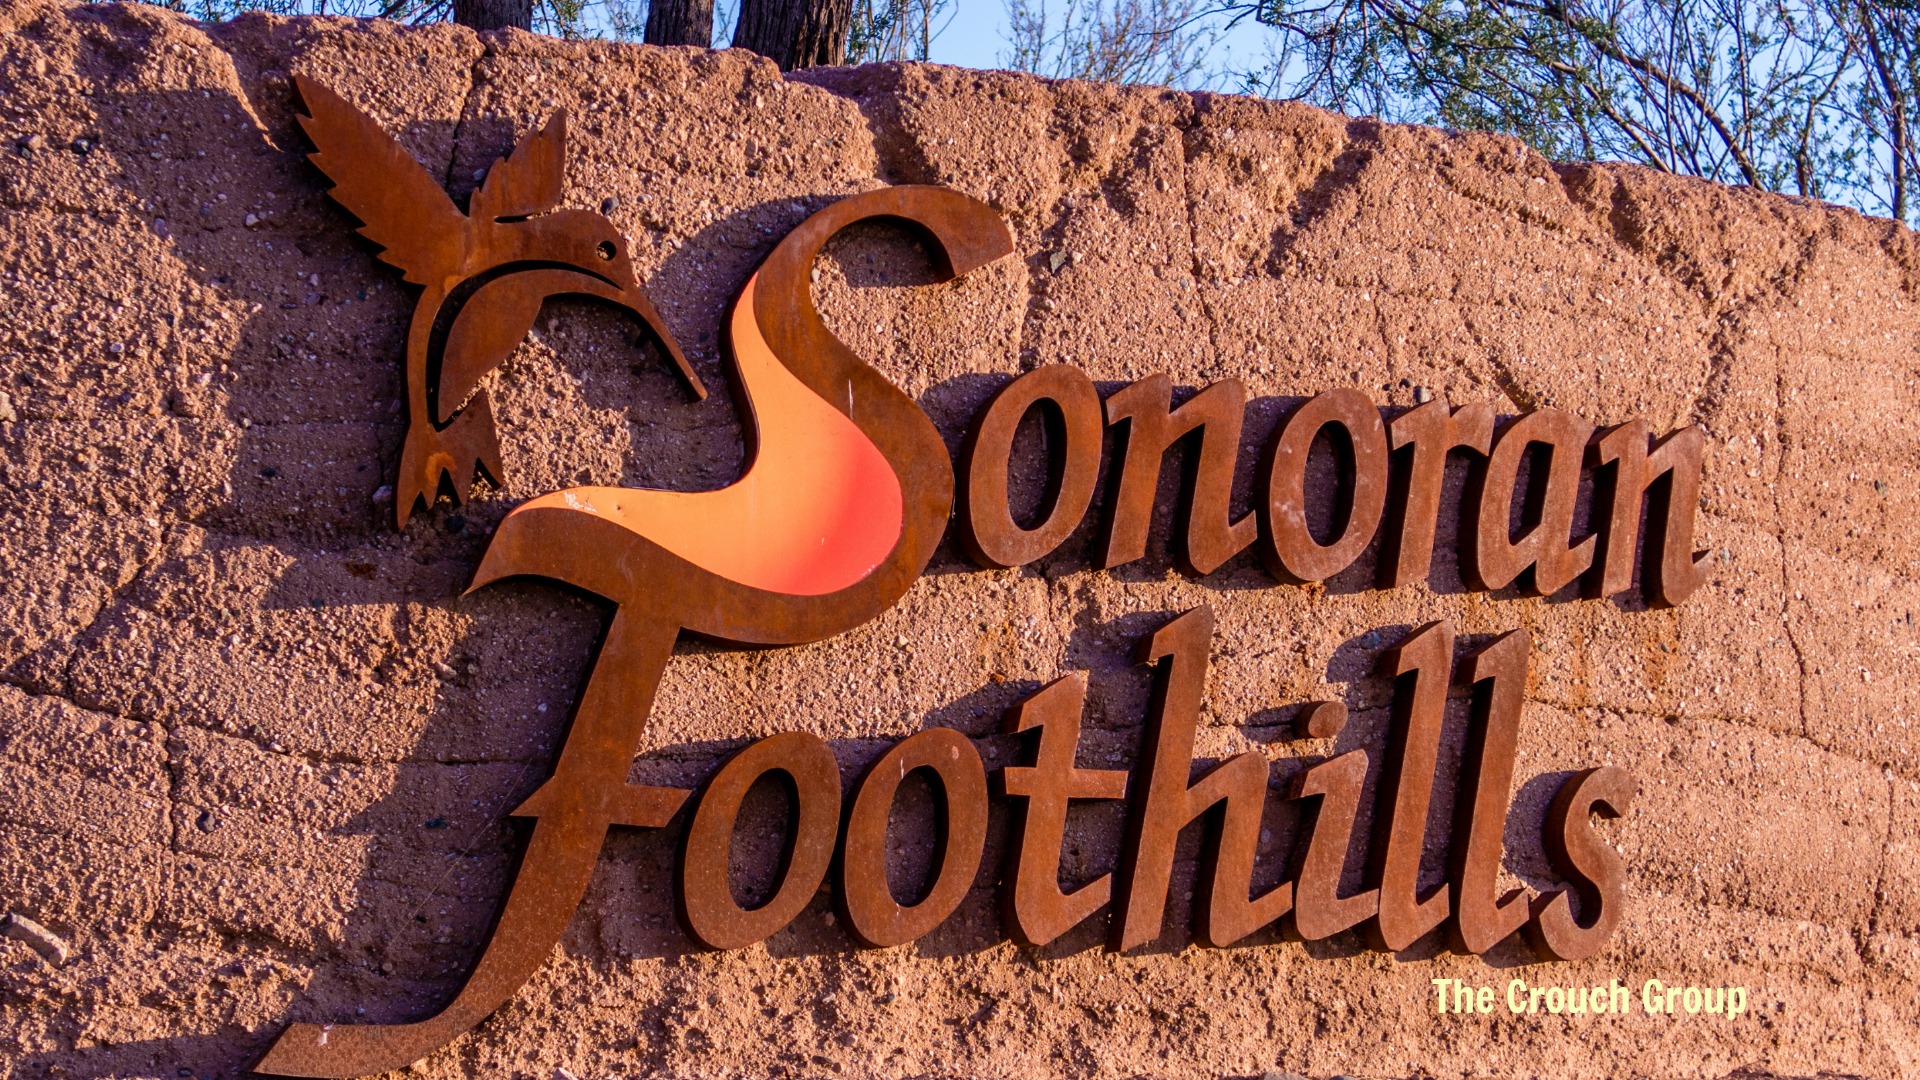 Sonoran Foothills sign for homes